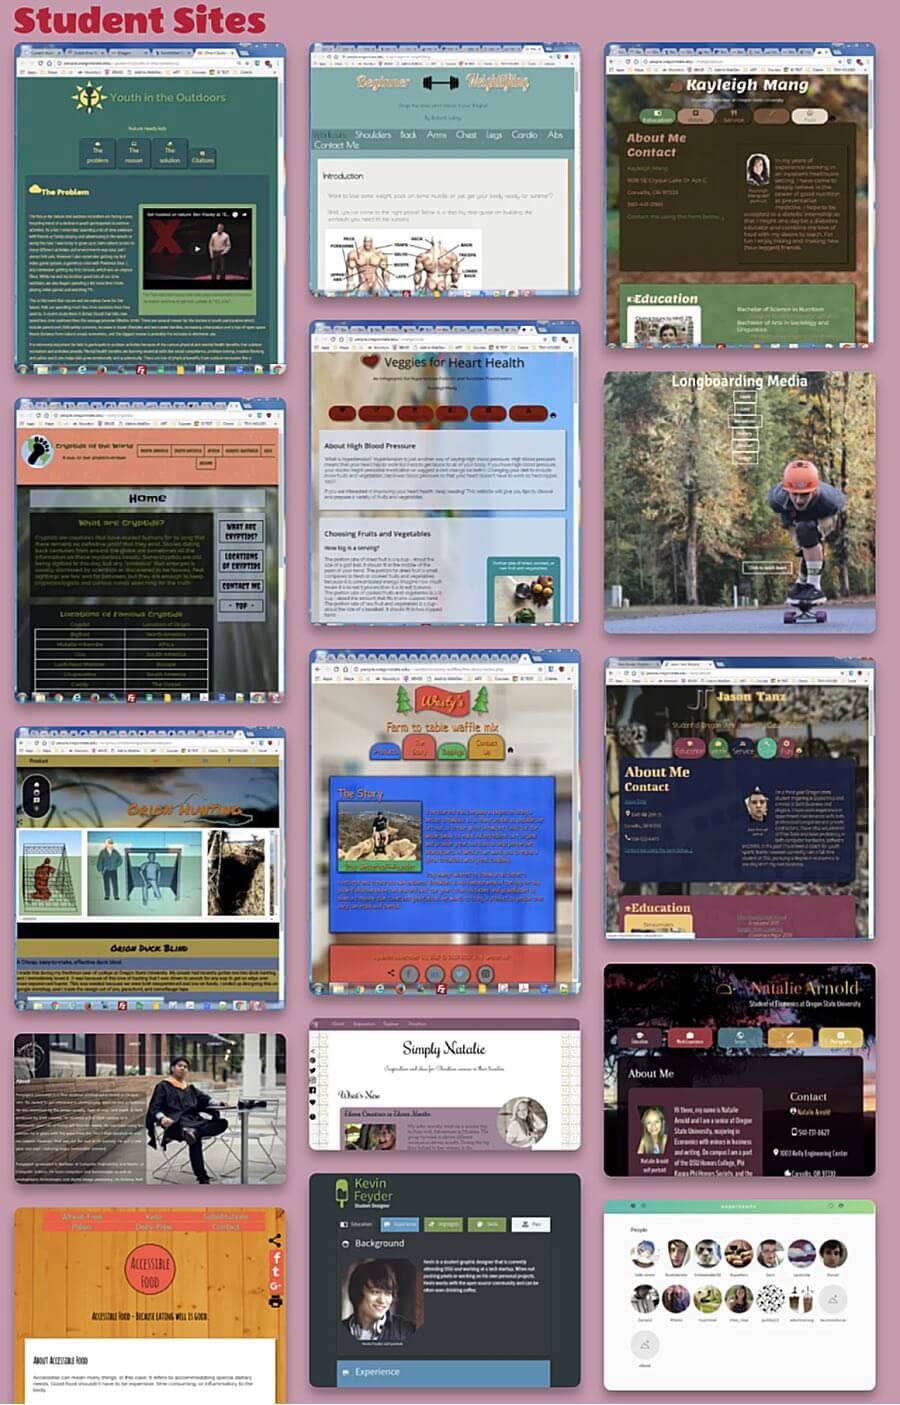 A sample of sites designed by students at OSU.